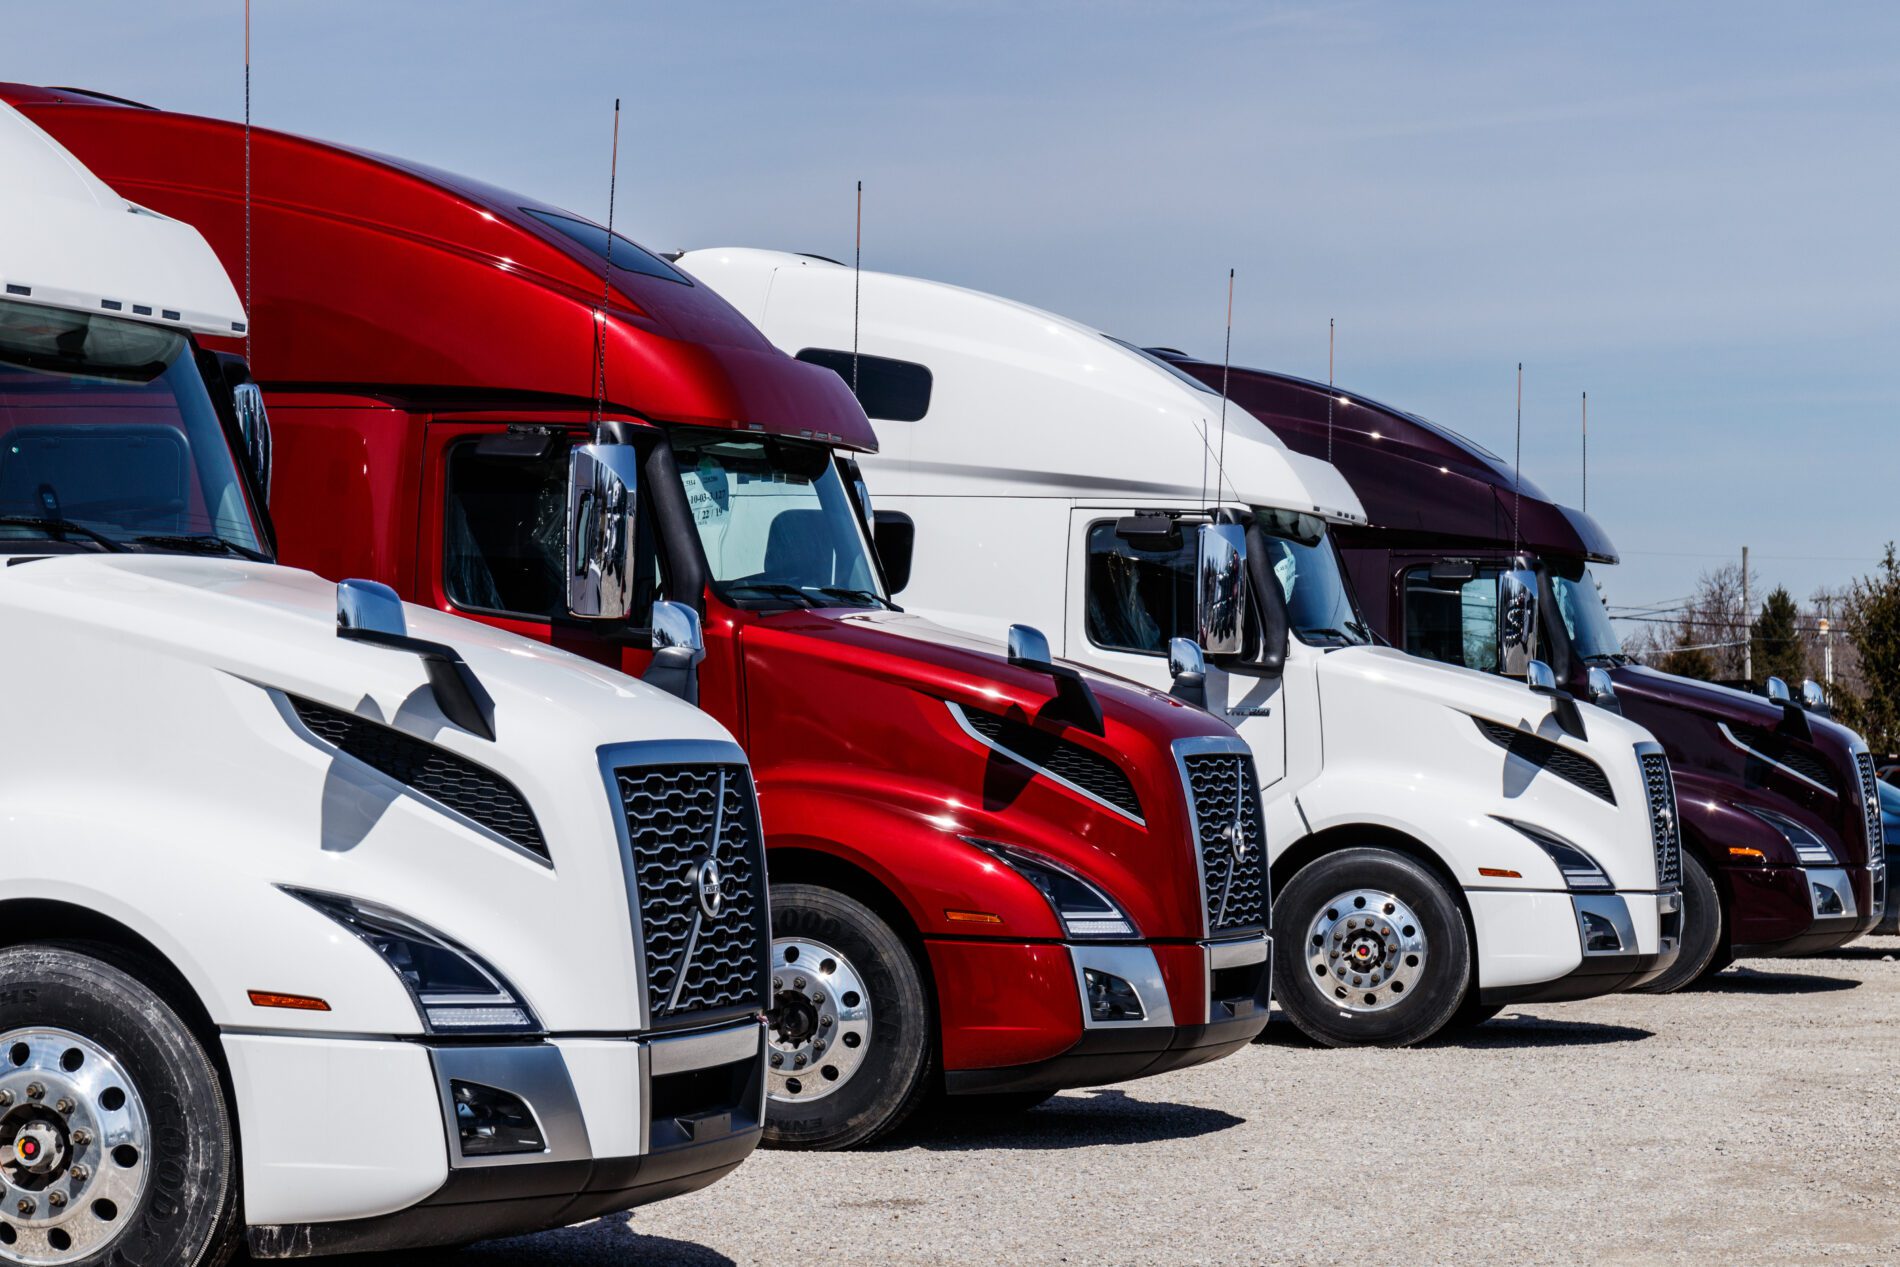 Muncie - Circa March 2019: Colorful Volvo Semi Tractor Trailer Trucks Lined up for Sale. Volvo is one of the largest truck manufacturers II